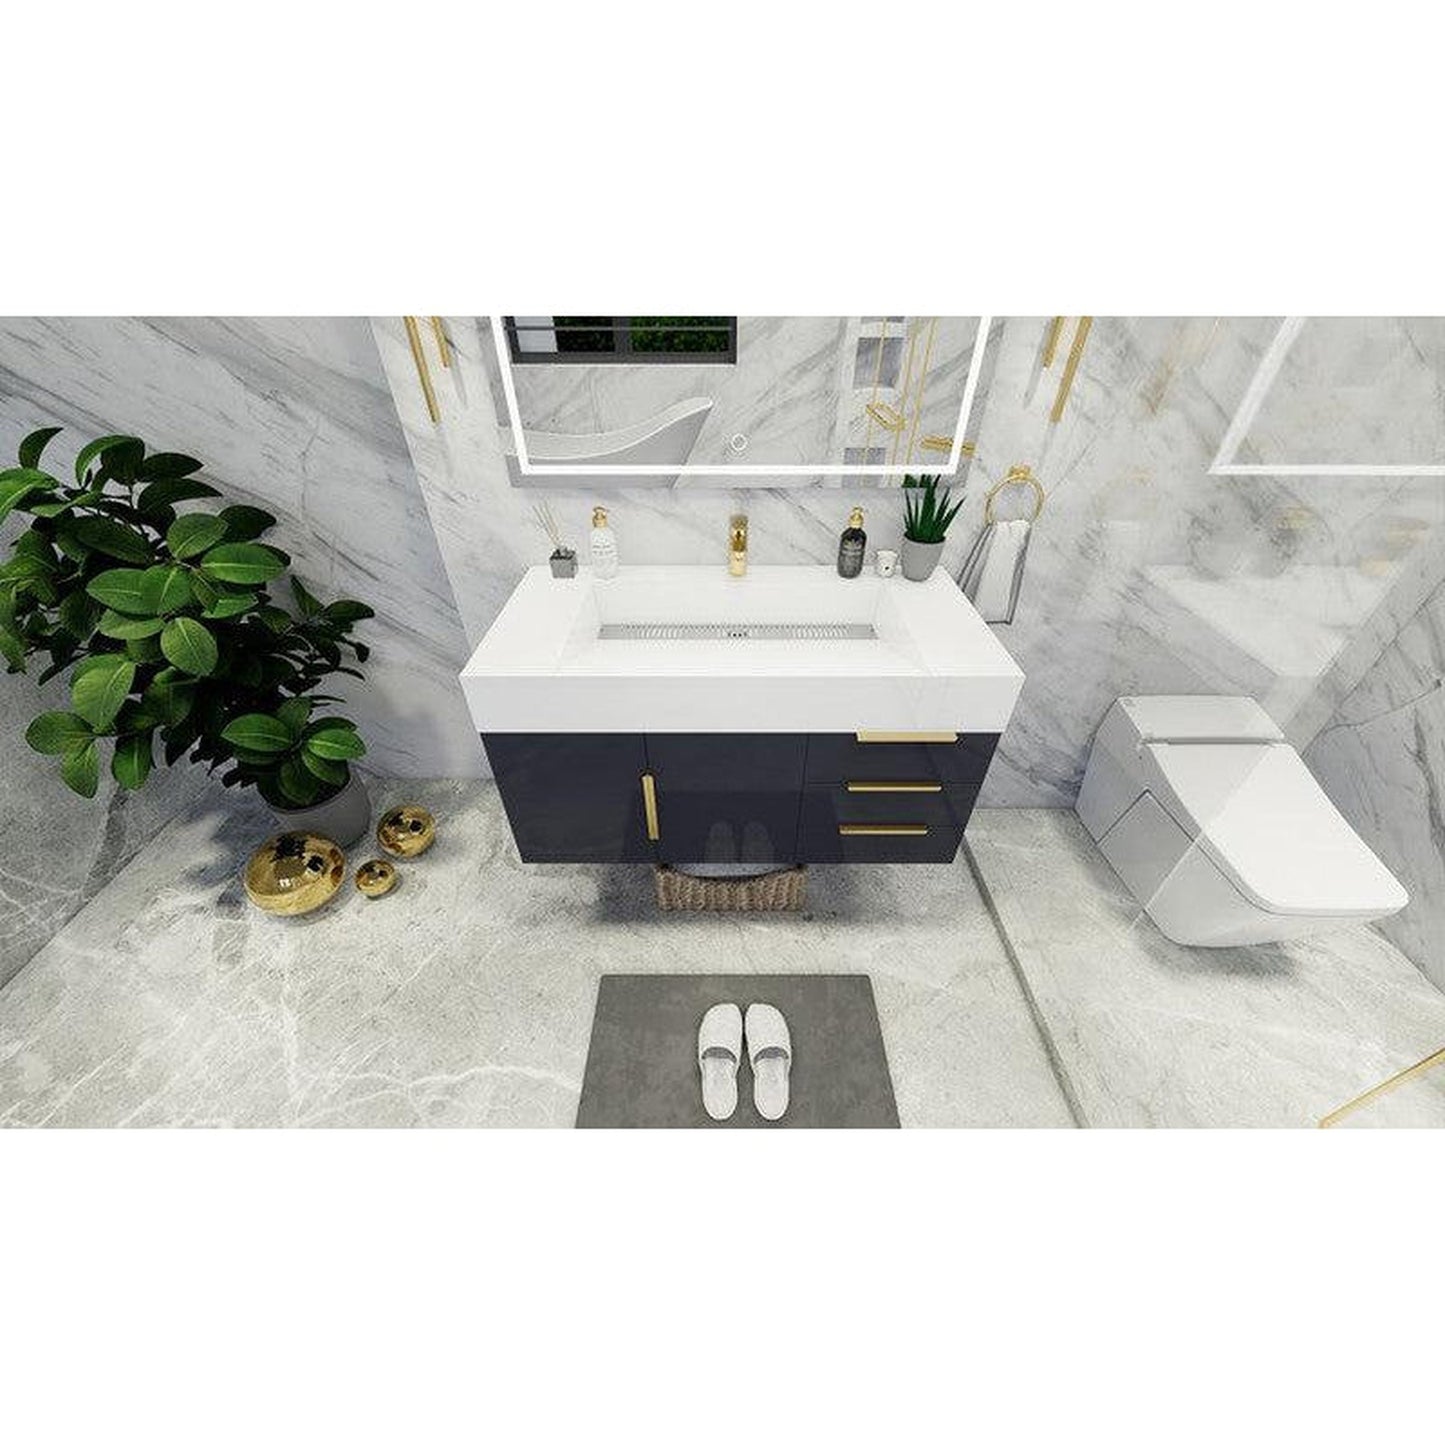 Moreno Bath Bethany 42" High Gloss Gray Wall-Mounted Vanity With Right Side Drawers and Single Reinforced White Acrylic Sink